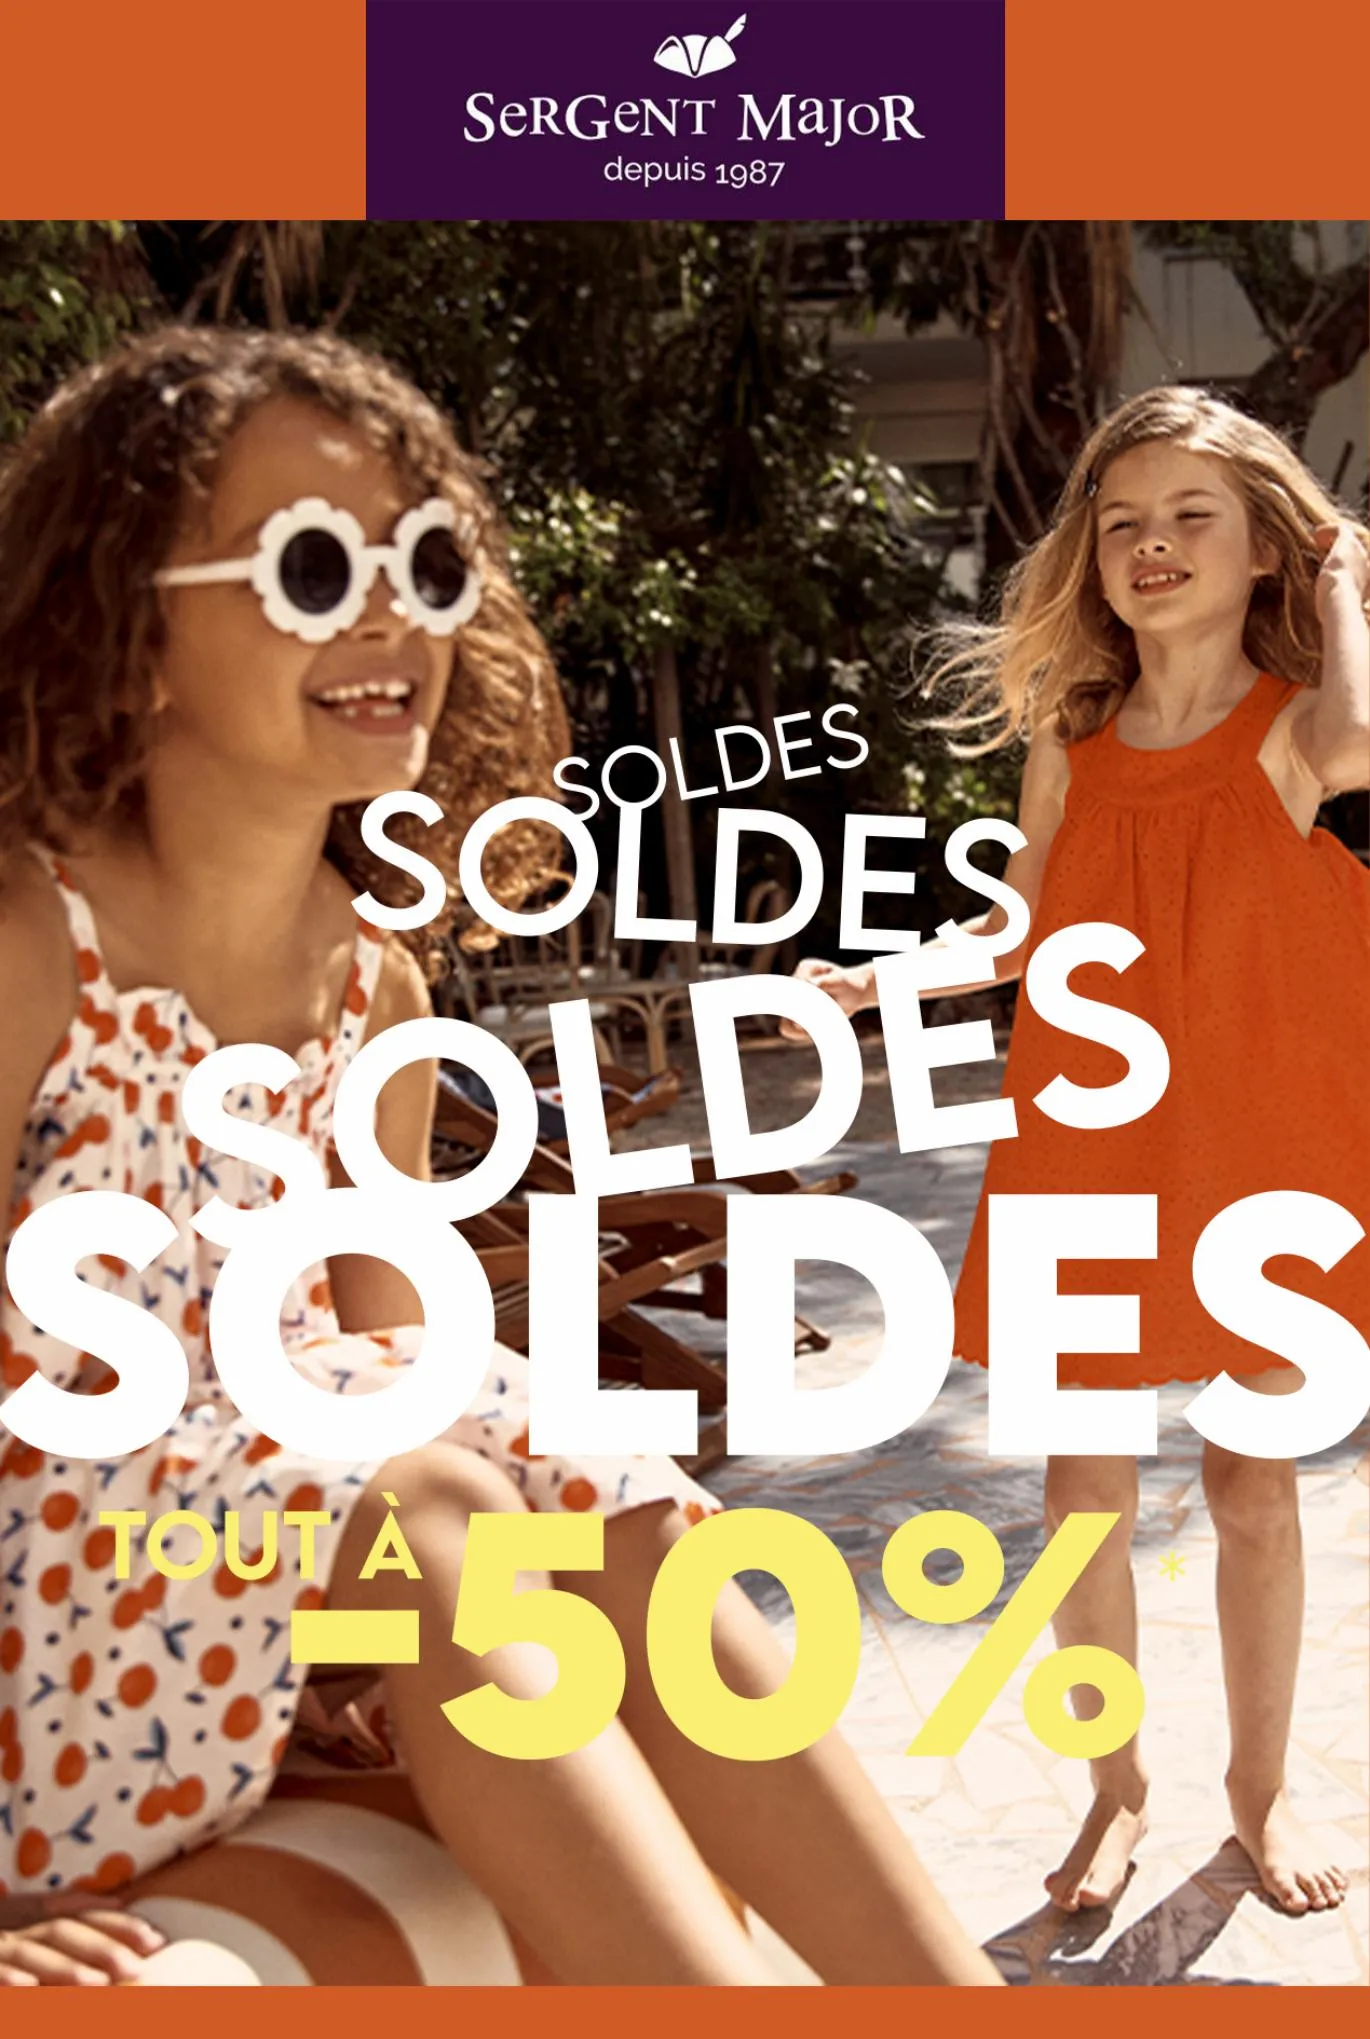 Catalogue Soldes -50% off, page 00001